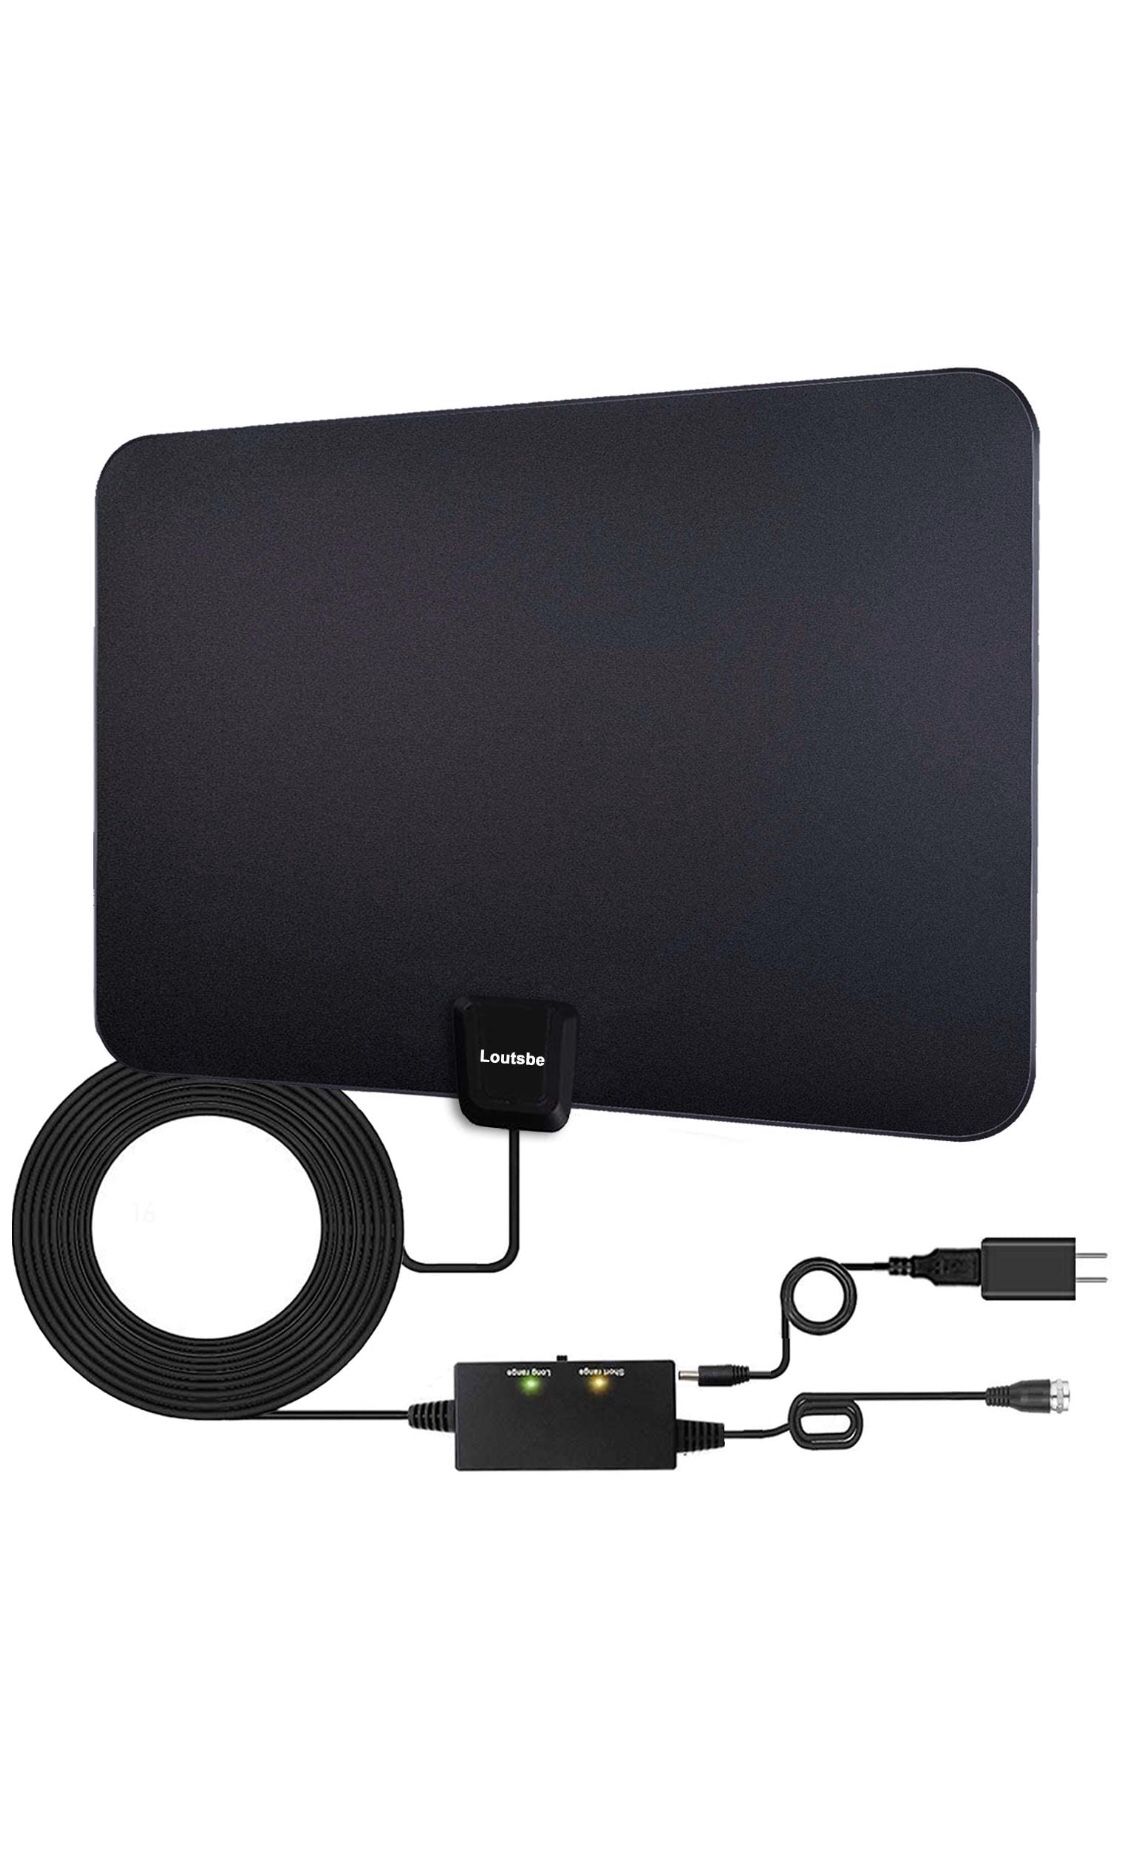 Loutsbe Amplified HD Digital TV Antenna,Indoor HDTV Digital Antenna 80 Mile,Support 4K 1080P Fire tv Stick&All Older TV's HDTV Antenna with Switch Am